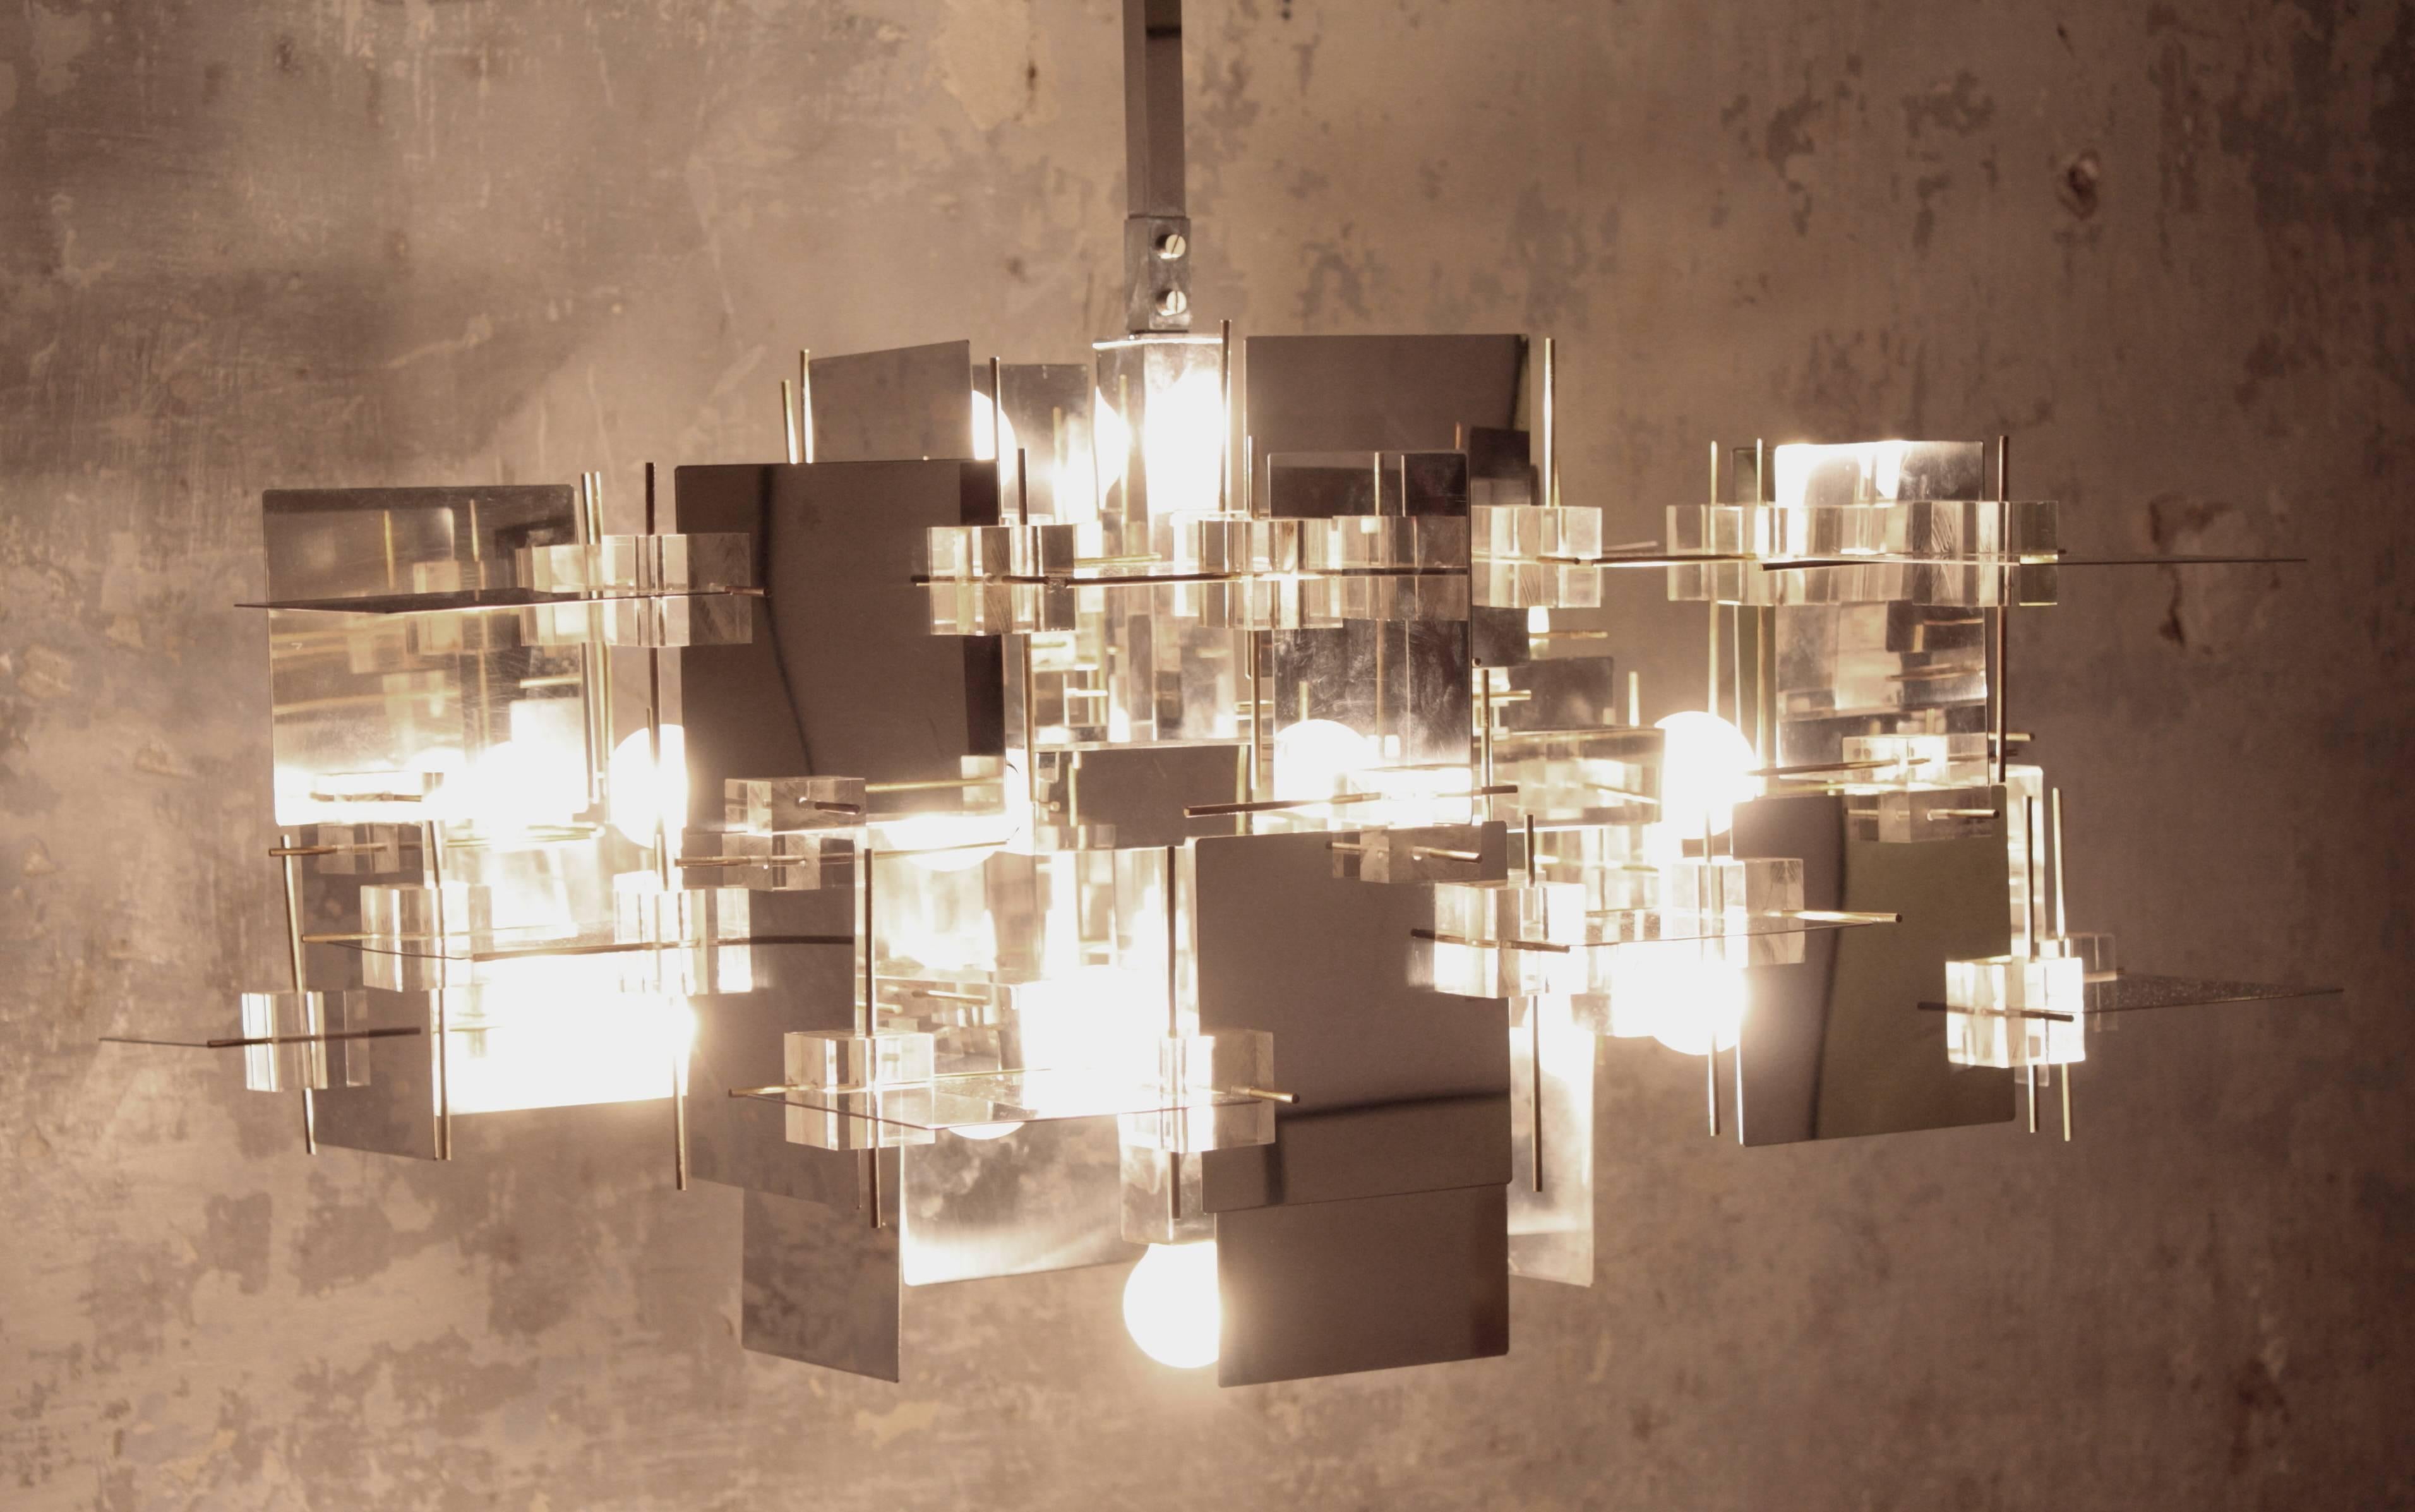 Spectacular multi-dimensional constructivist chandelier designed by Gaetano Sciolari. The chandelier is composed by polished chrome steel panels at varying axis with Lucite geometric cubes and brass pin accents and it has 13 sockets.
The design of